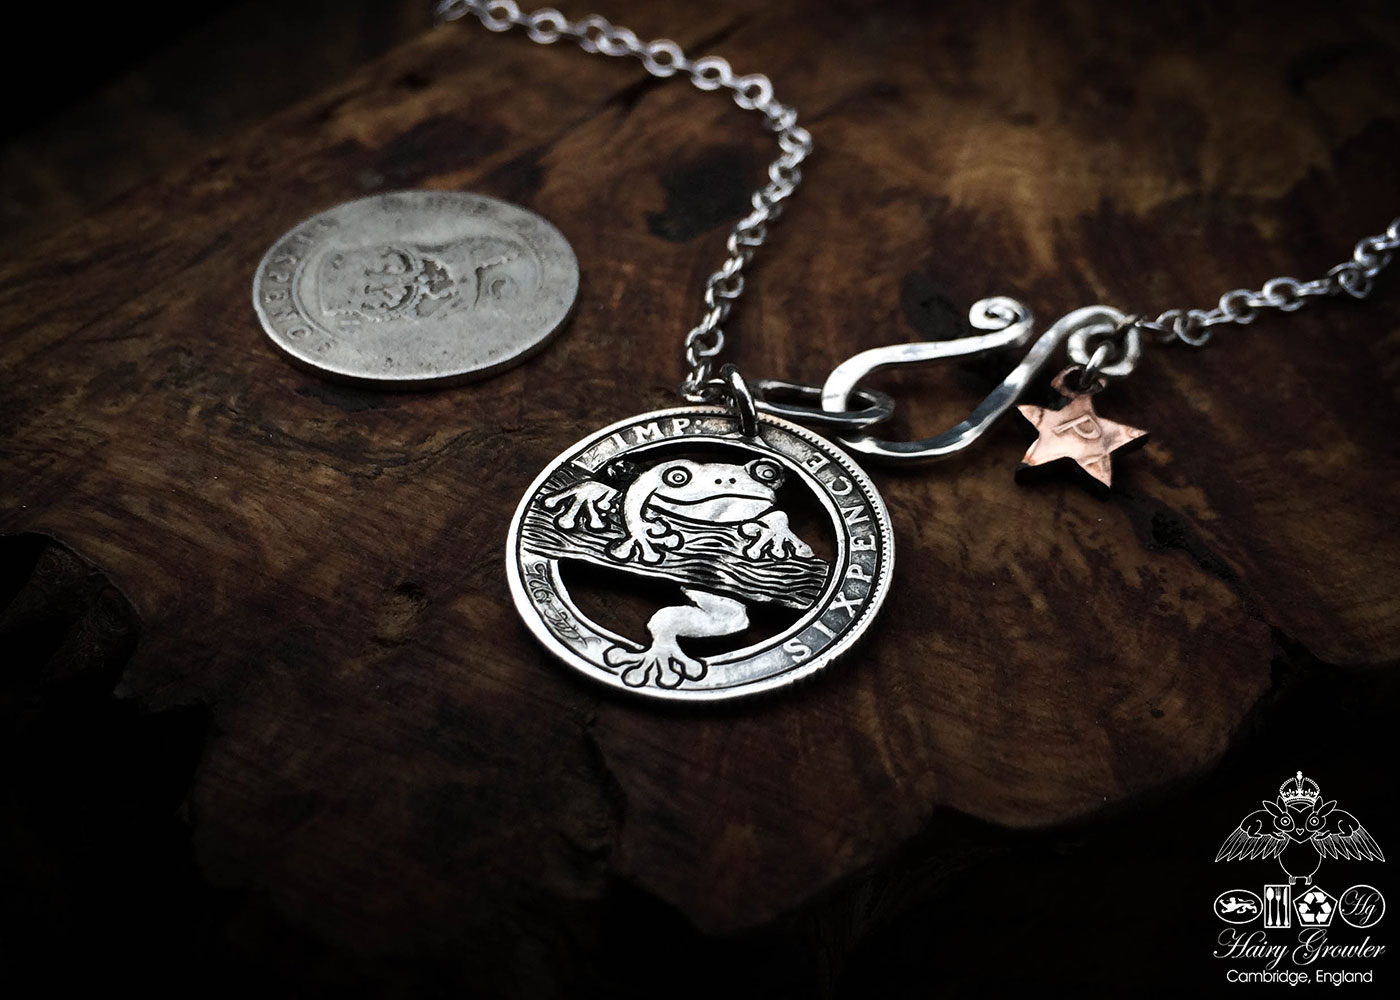 Handcrafted and recycled silver sixpence coin frog pendant necklace